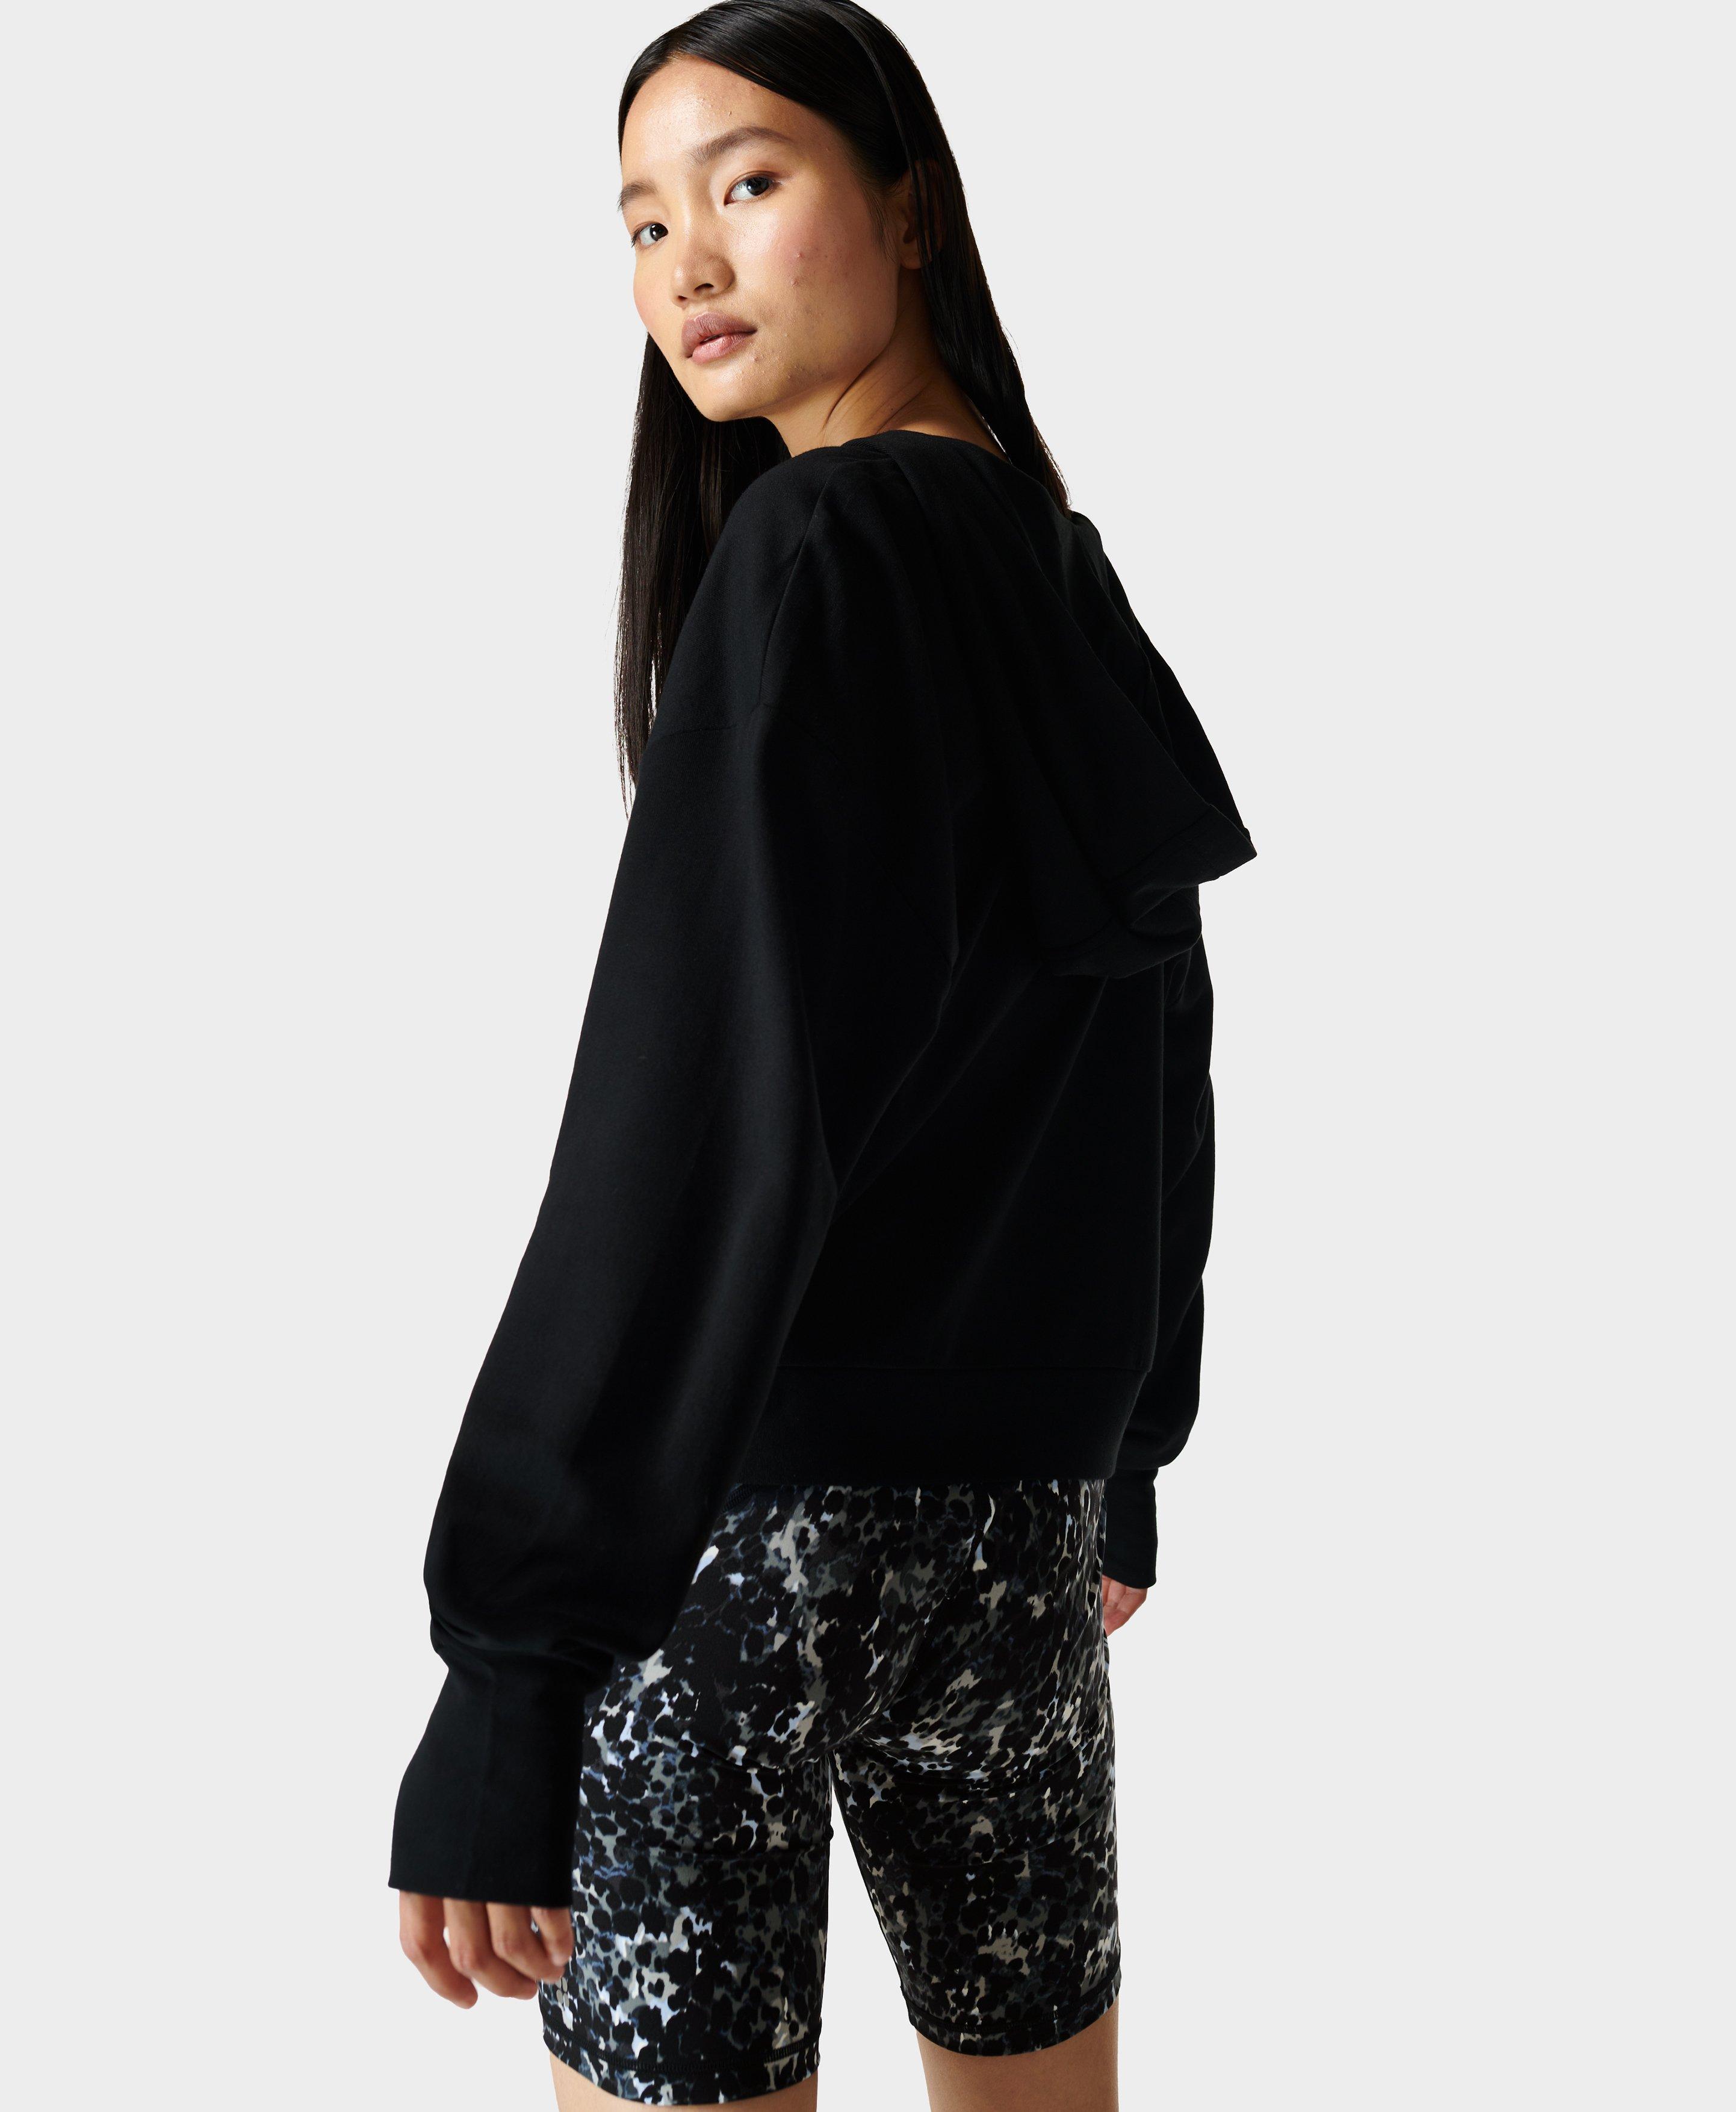 After Class Relaxed Hoody- black | Women's Jumpers